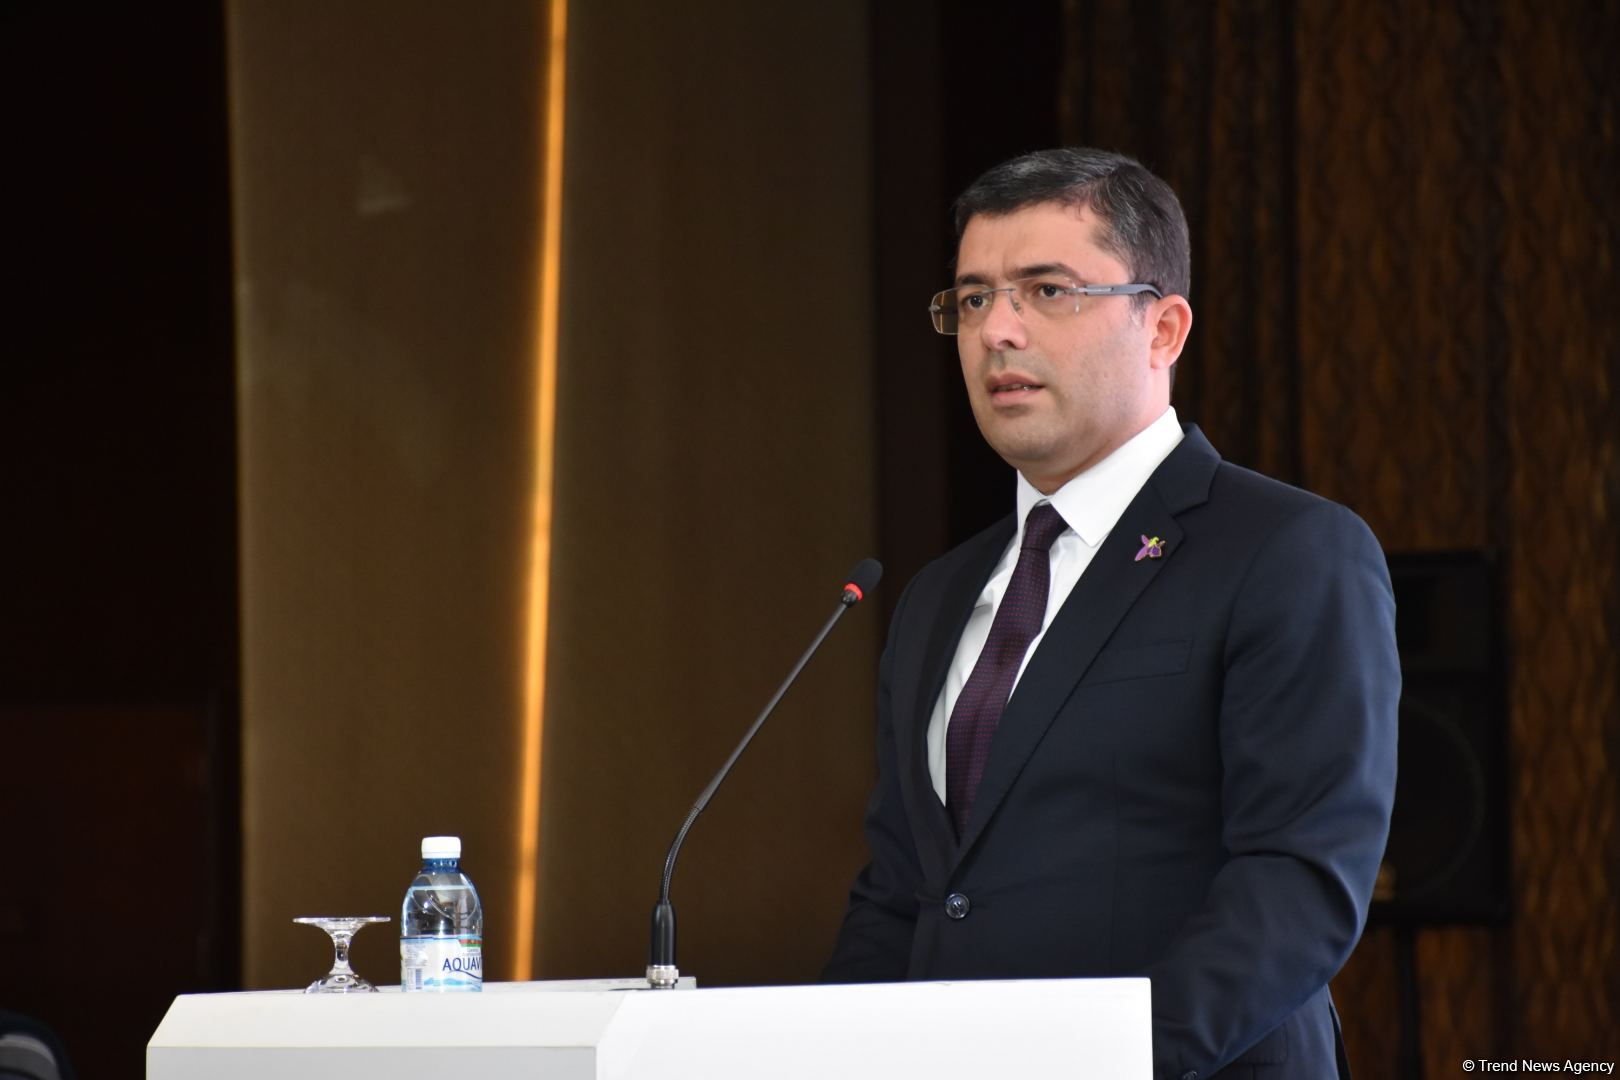 Journalists, social media users have to comply with information security requirements - Azerbaijani official